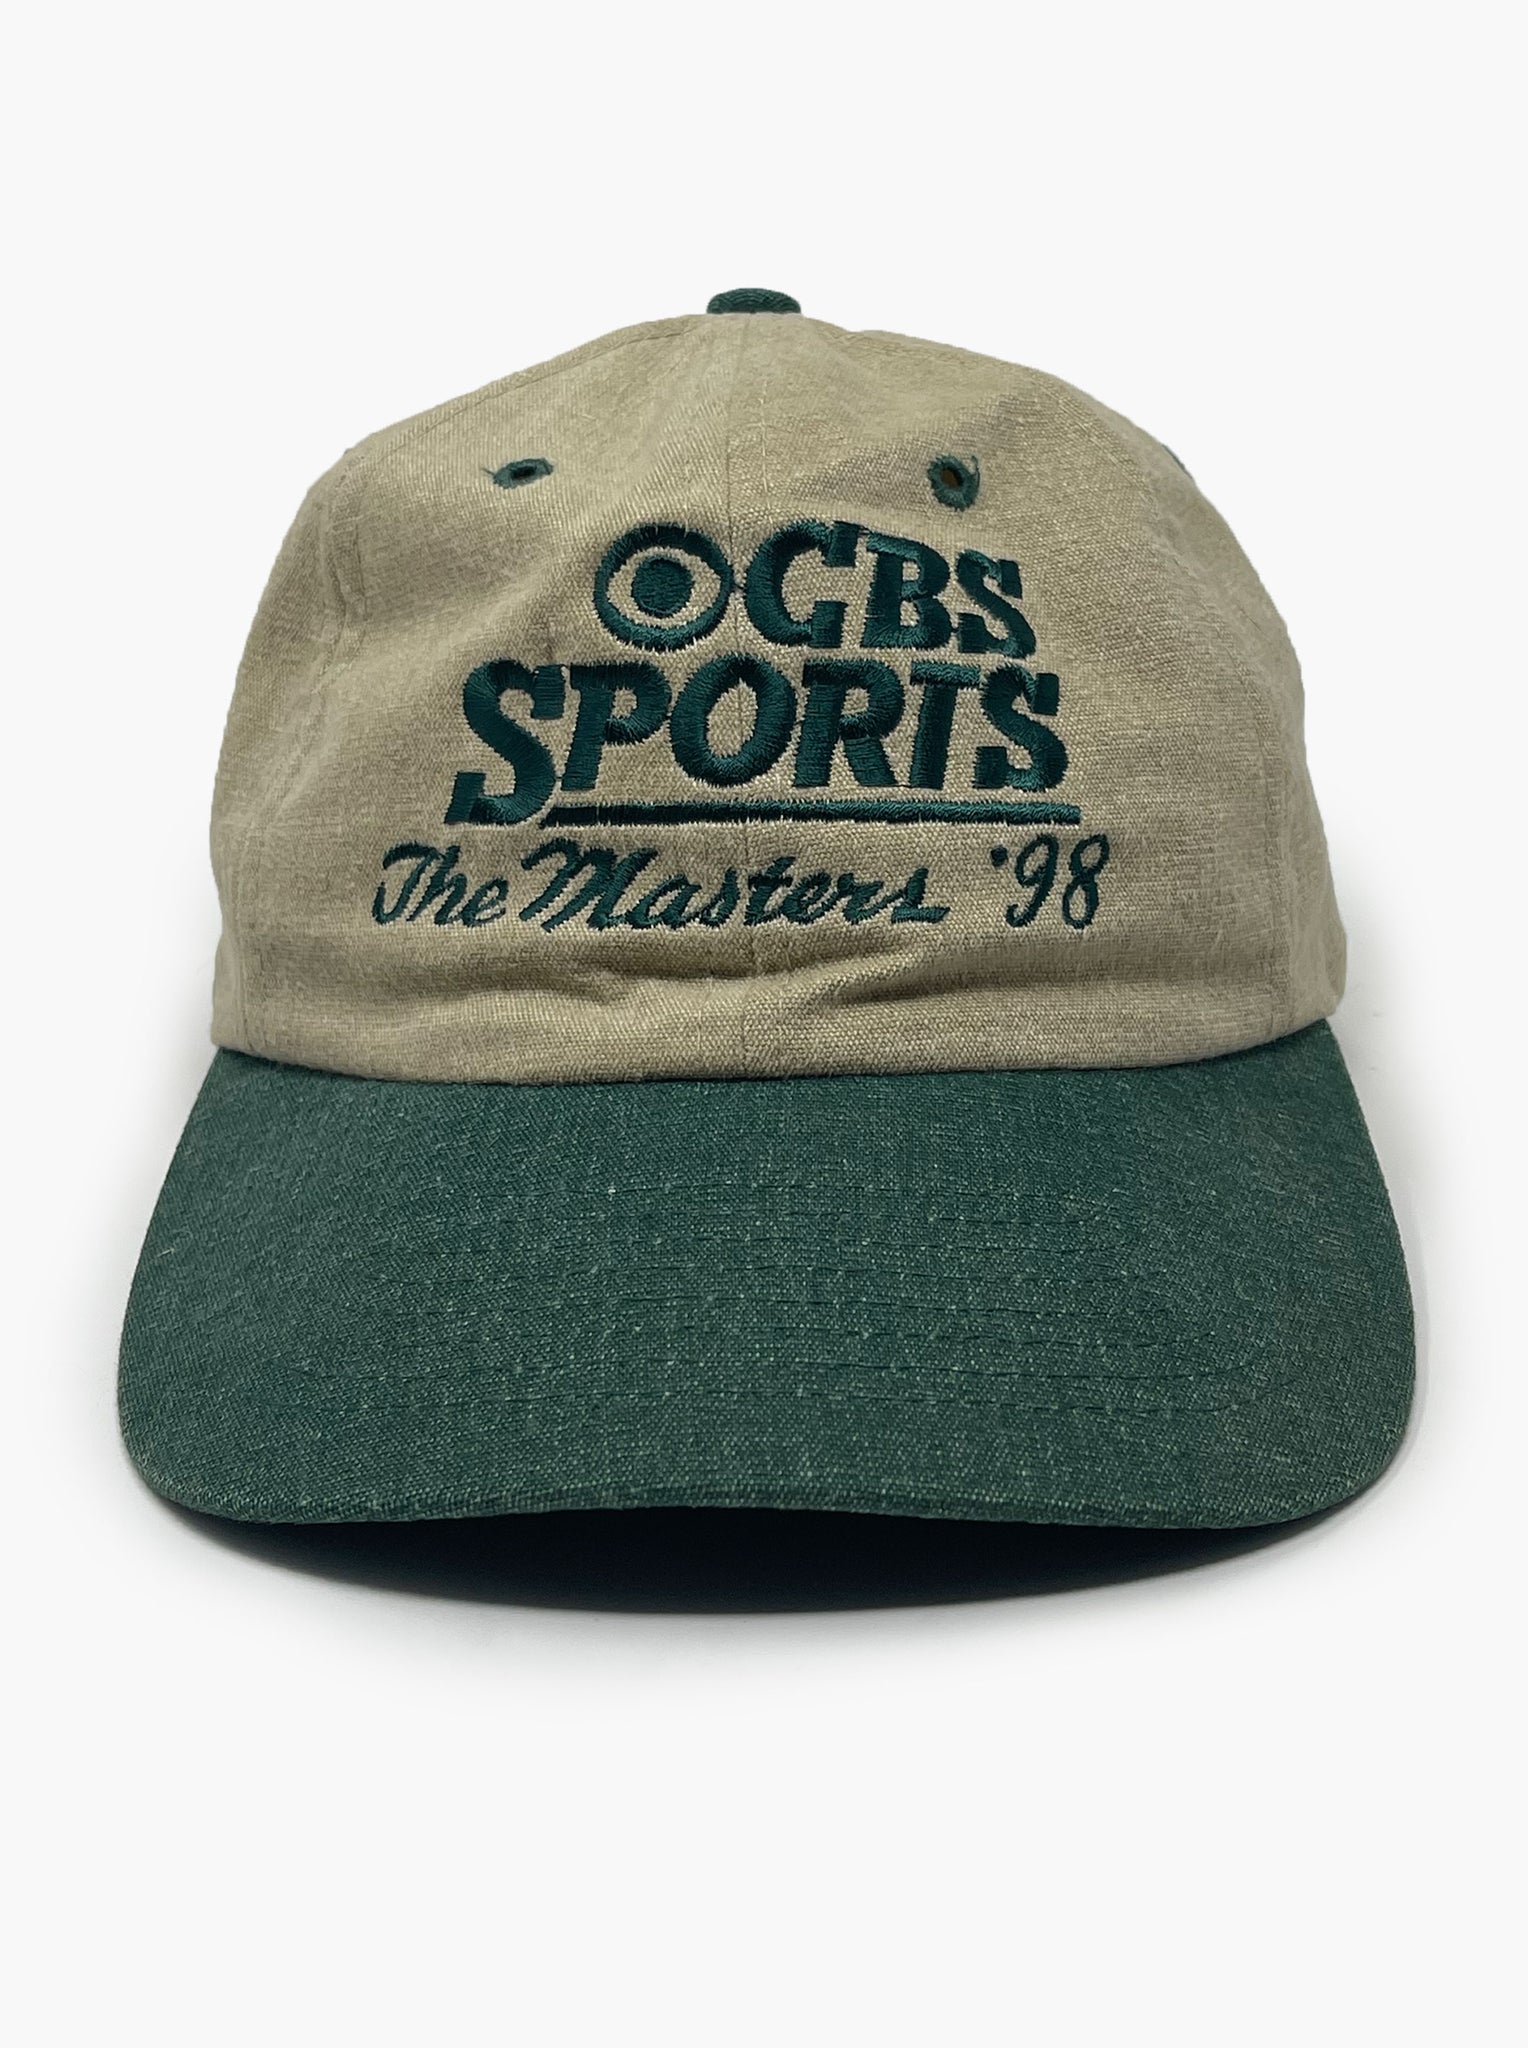 CBS Sports The Masters '98 Golf Dad Hat - Front View - Golfitecture